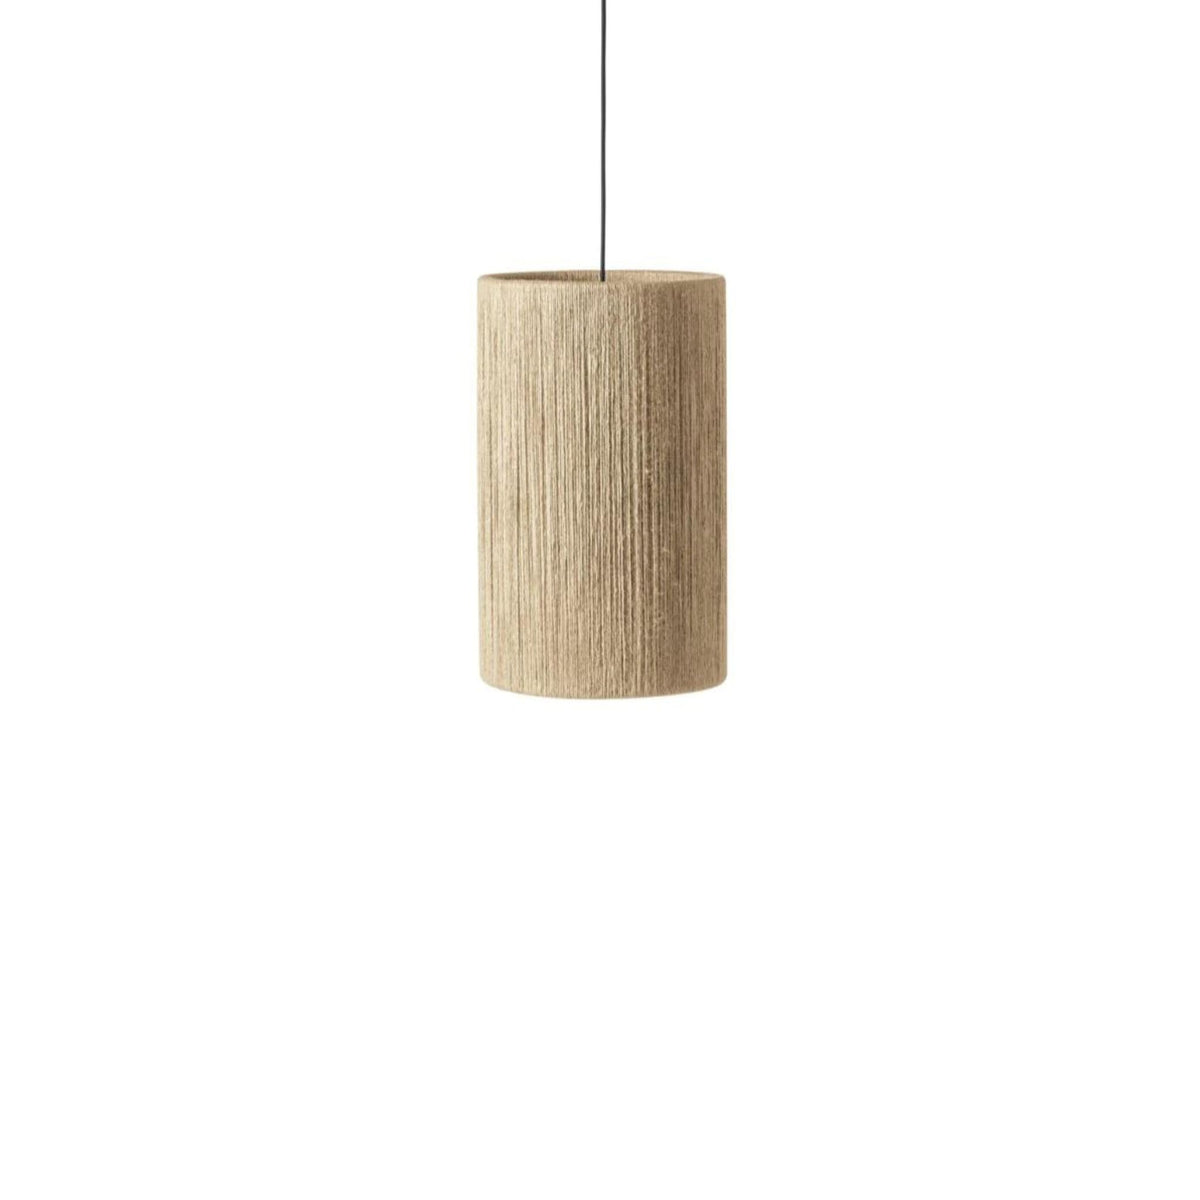 Made by Hand RO Pendant Lamp 30 by Kim Richardt